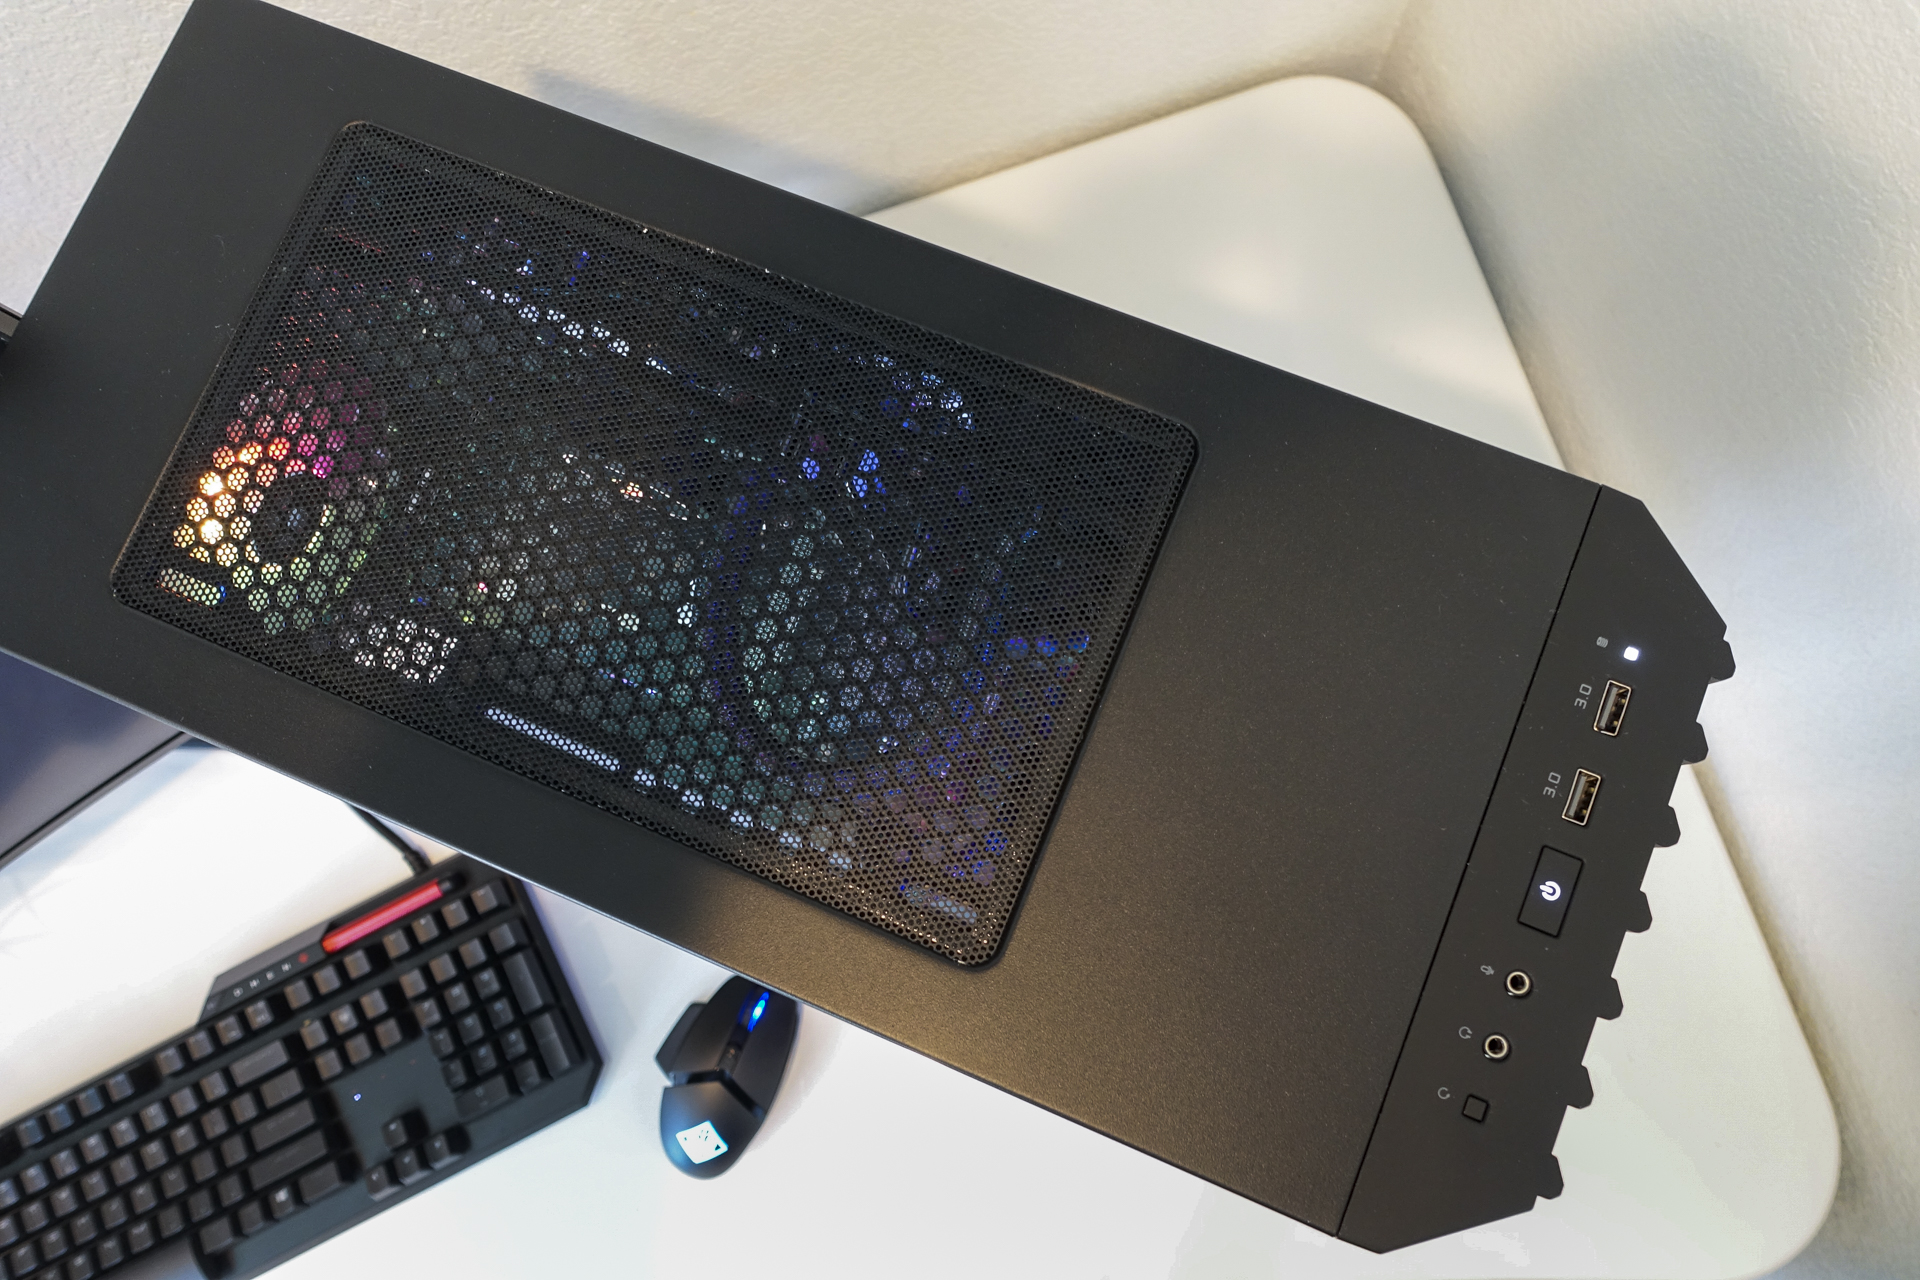 Digital Storm Lynx Review: A Prebuilt Gaming PC With Stylish ...